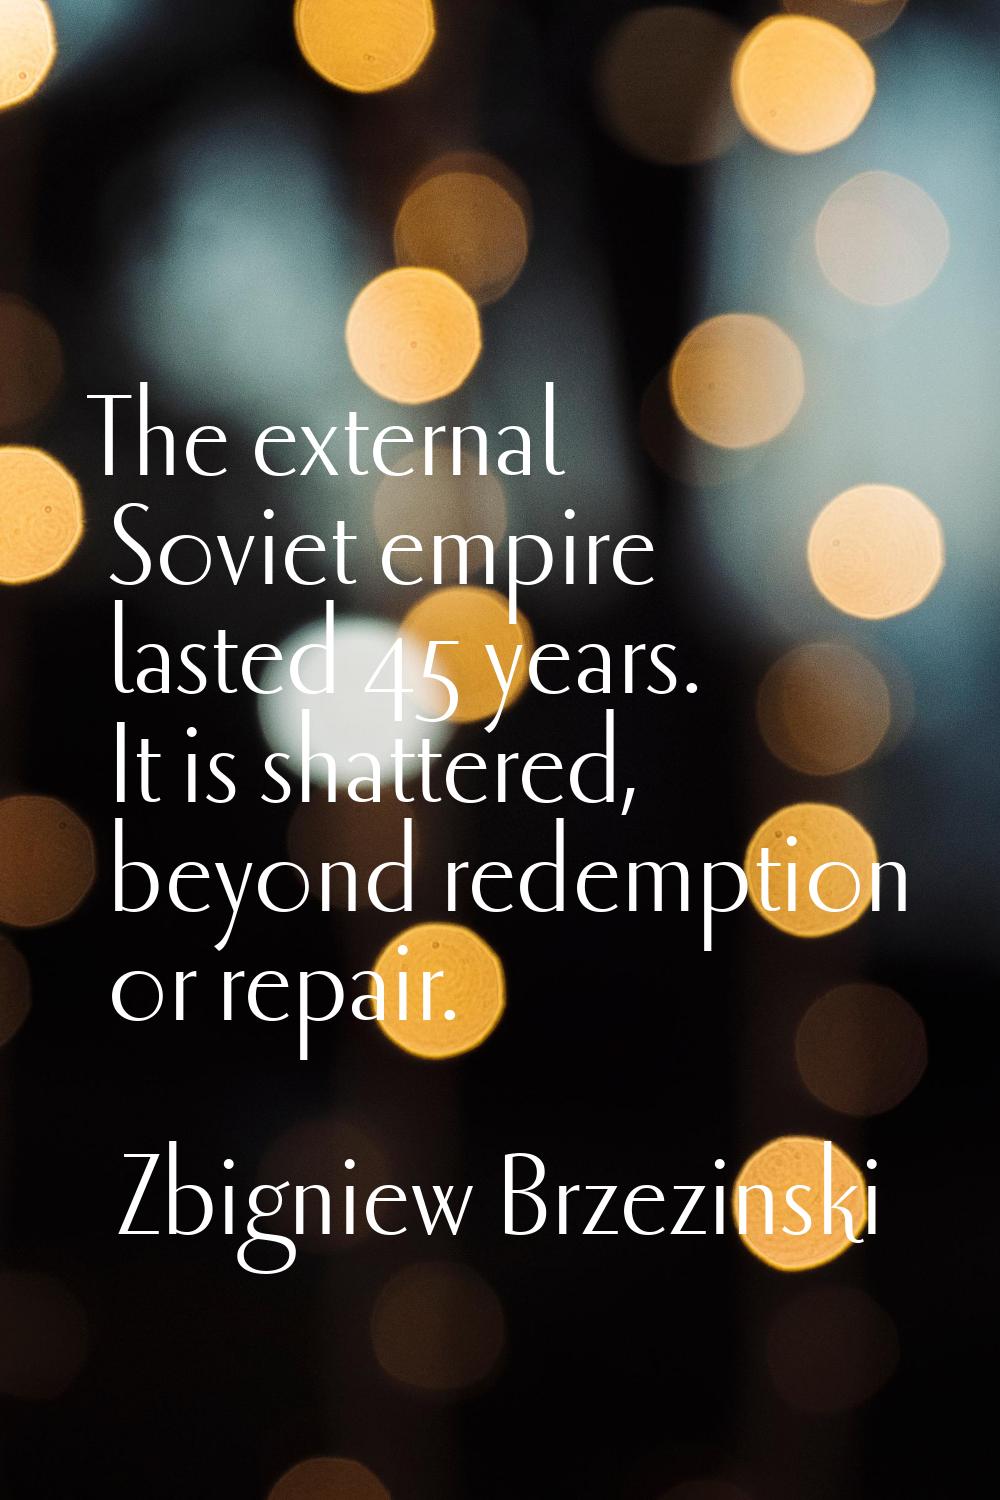 The external Soviet empire lasted 45 years. It is shattered, beyond redemption or repair.